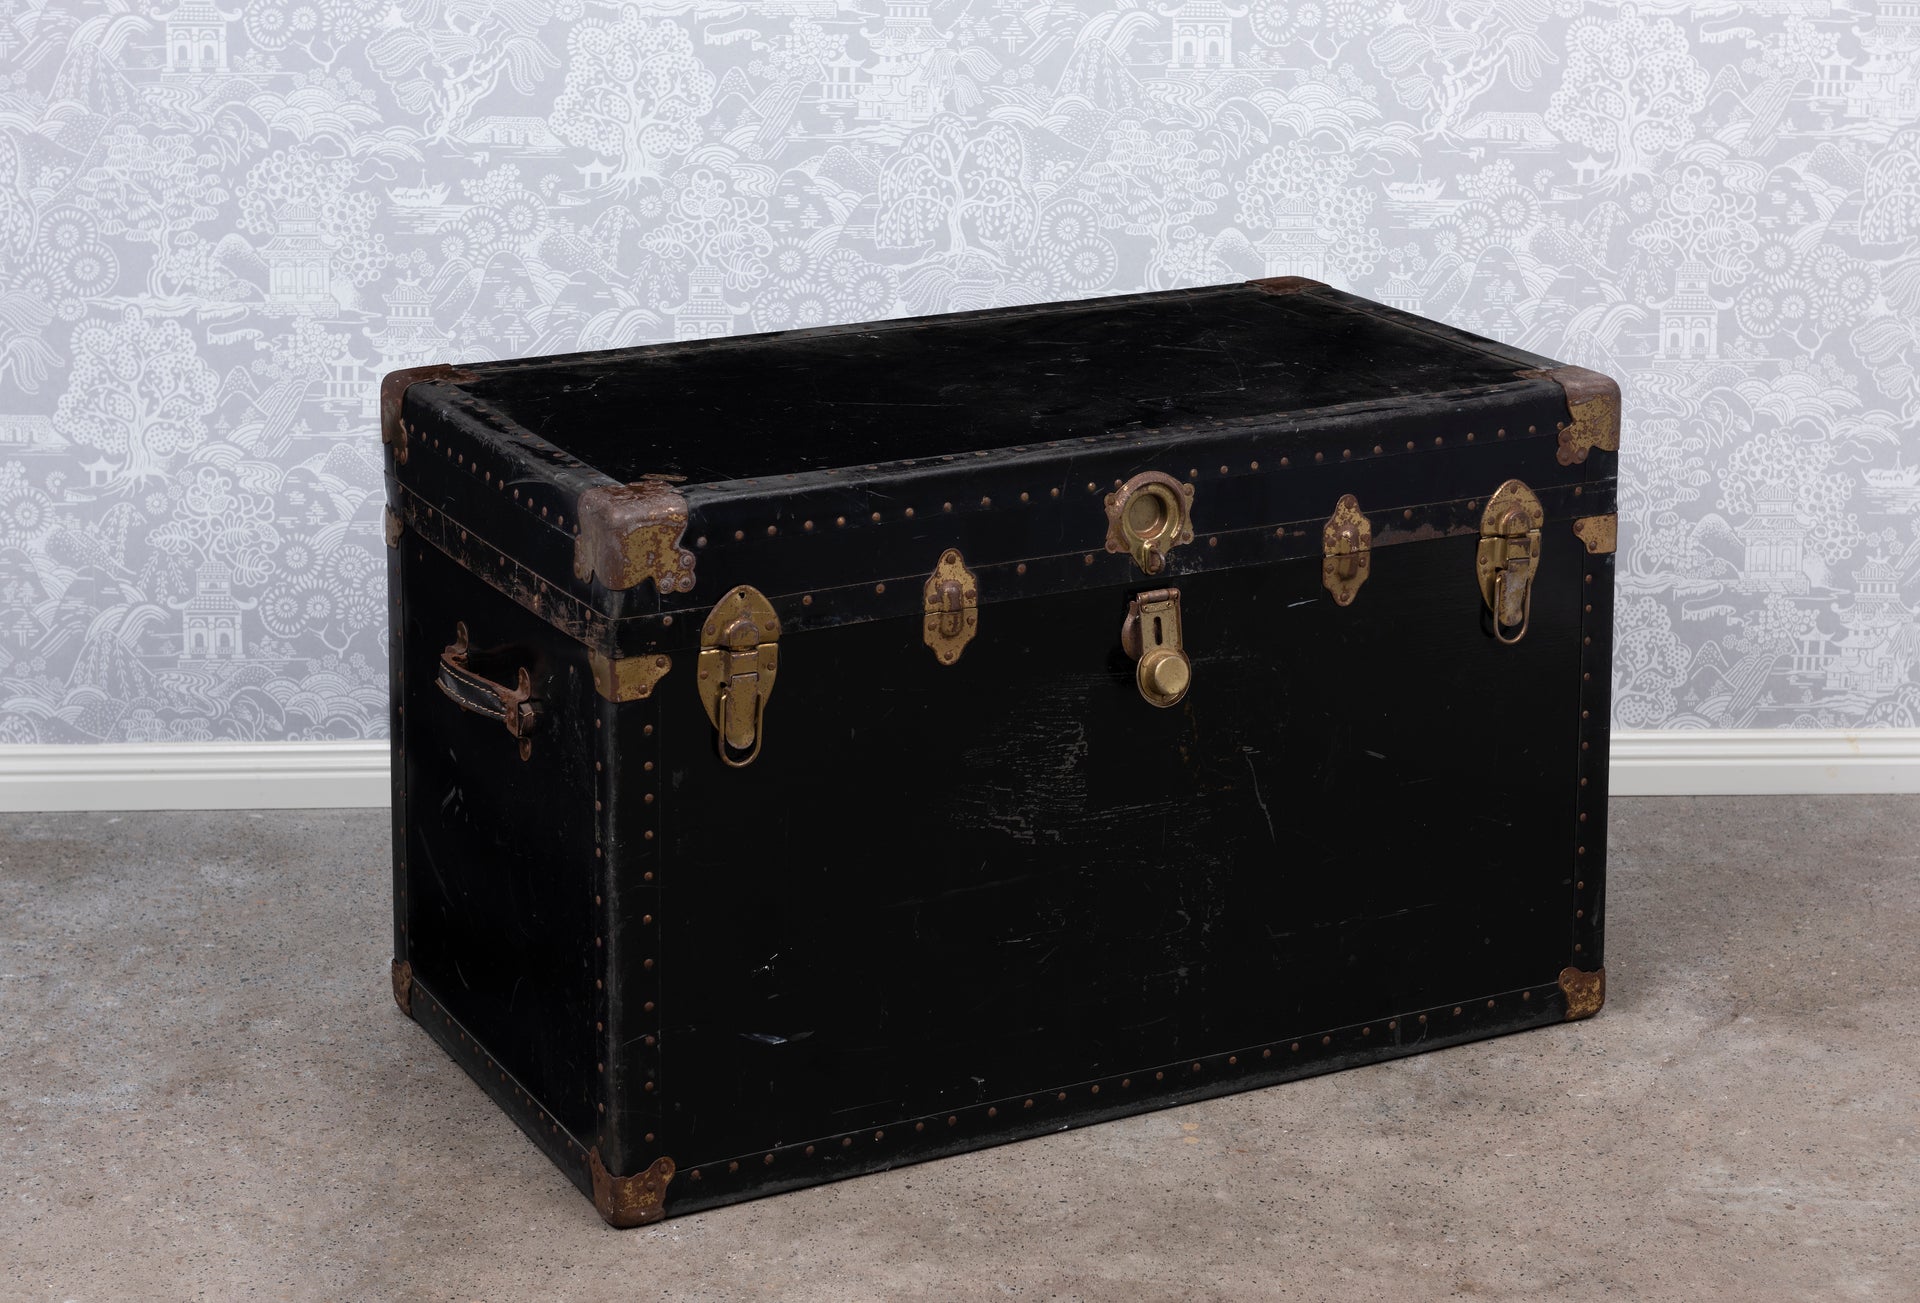 SOLD A vintage steamer trunk chest, stamped for Herald- Macy's of New York, American Circa 1930